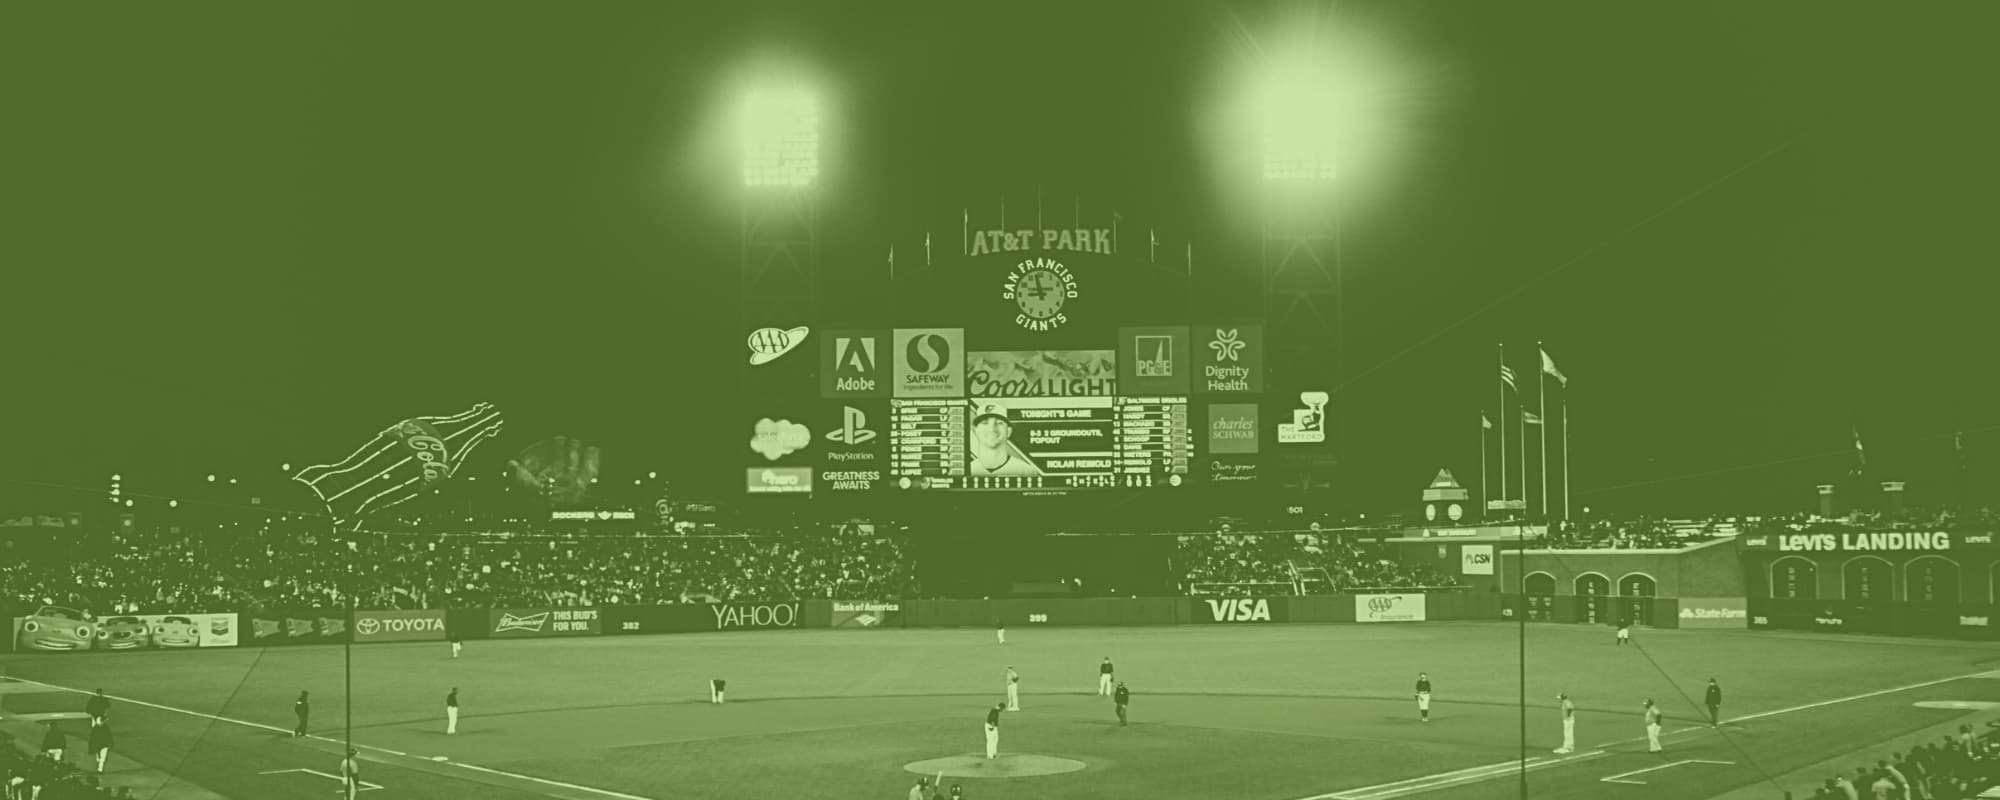 3 Steps To Finding, Pitching, & Keeping Event Sponsors